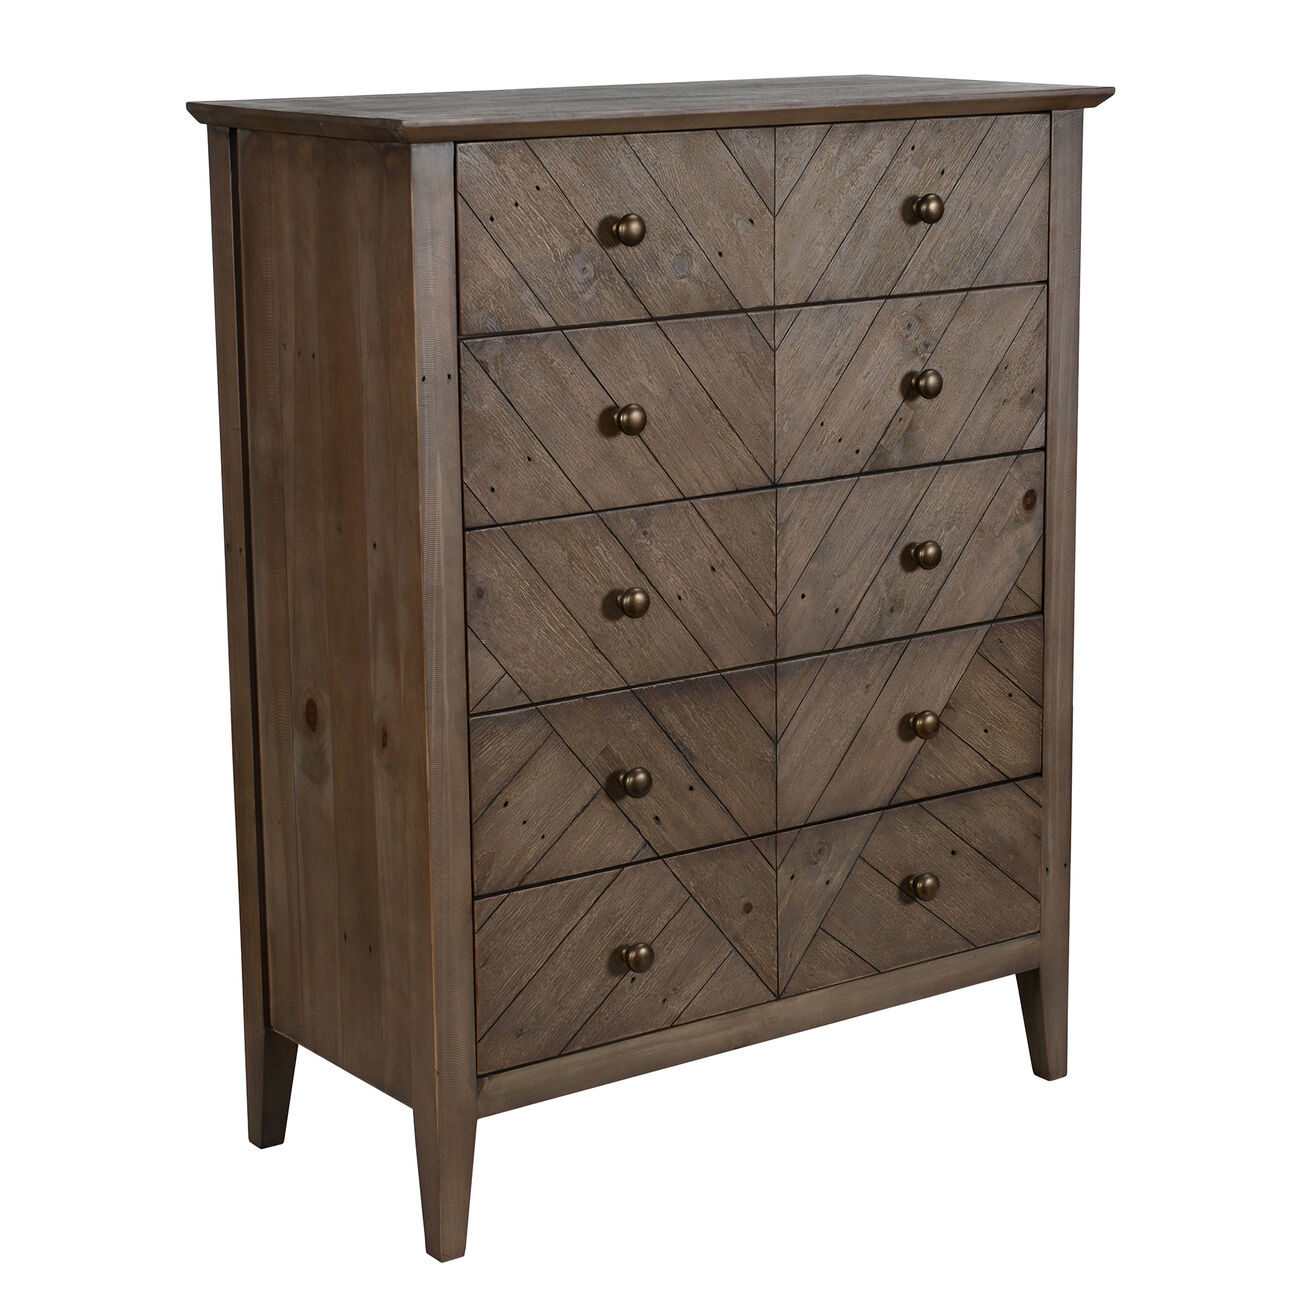 5 Drawer Dresser with Herringbone Pattern and Chamfered Legs, Rustic Brown